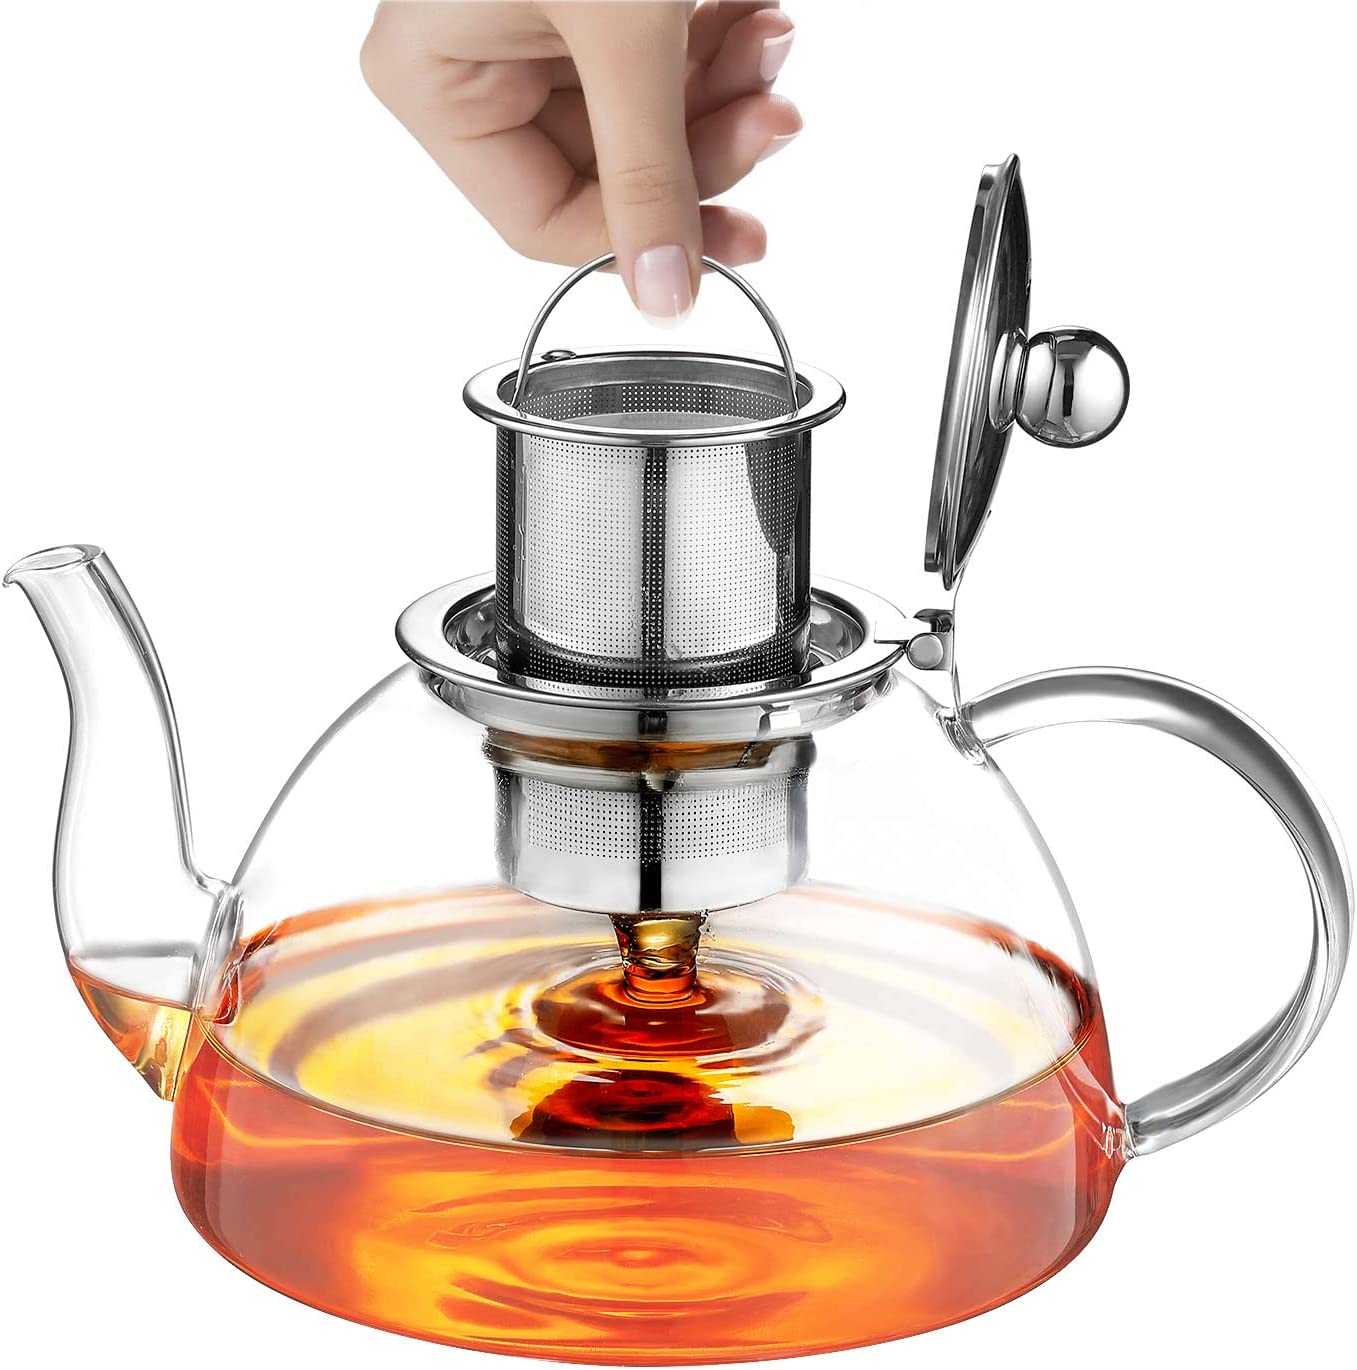 Ehugos Glass Teapot with Strainer Insert, 1300 ml, Made of Borosilicate Glass, Glass Jug and Glass Lid, Dishwasher Safe